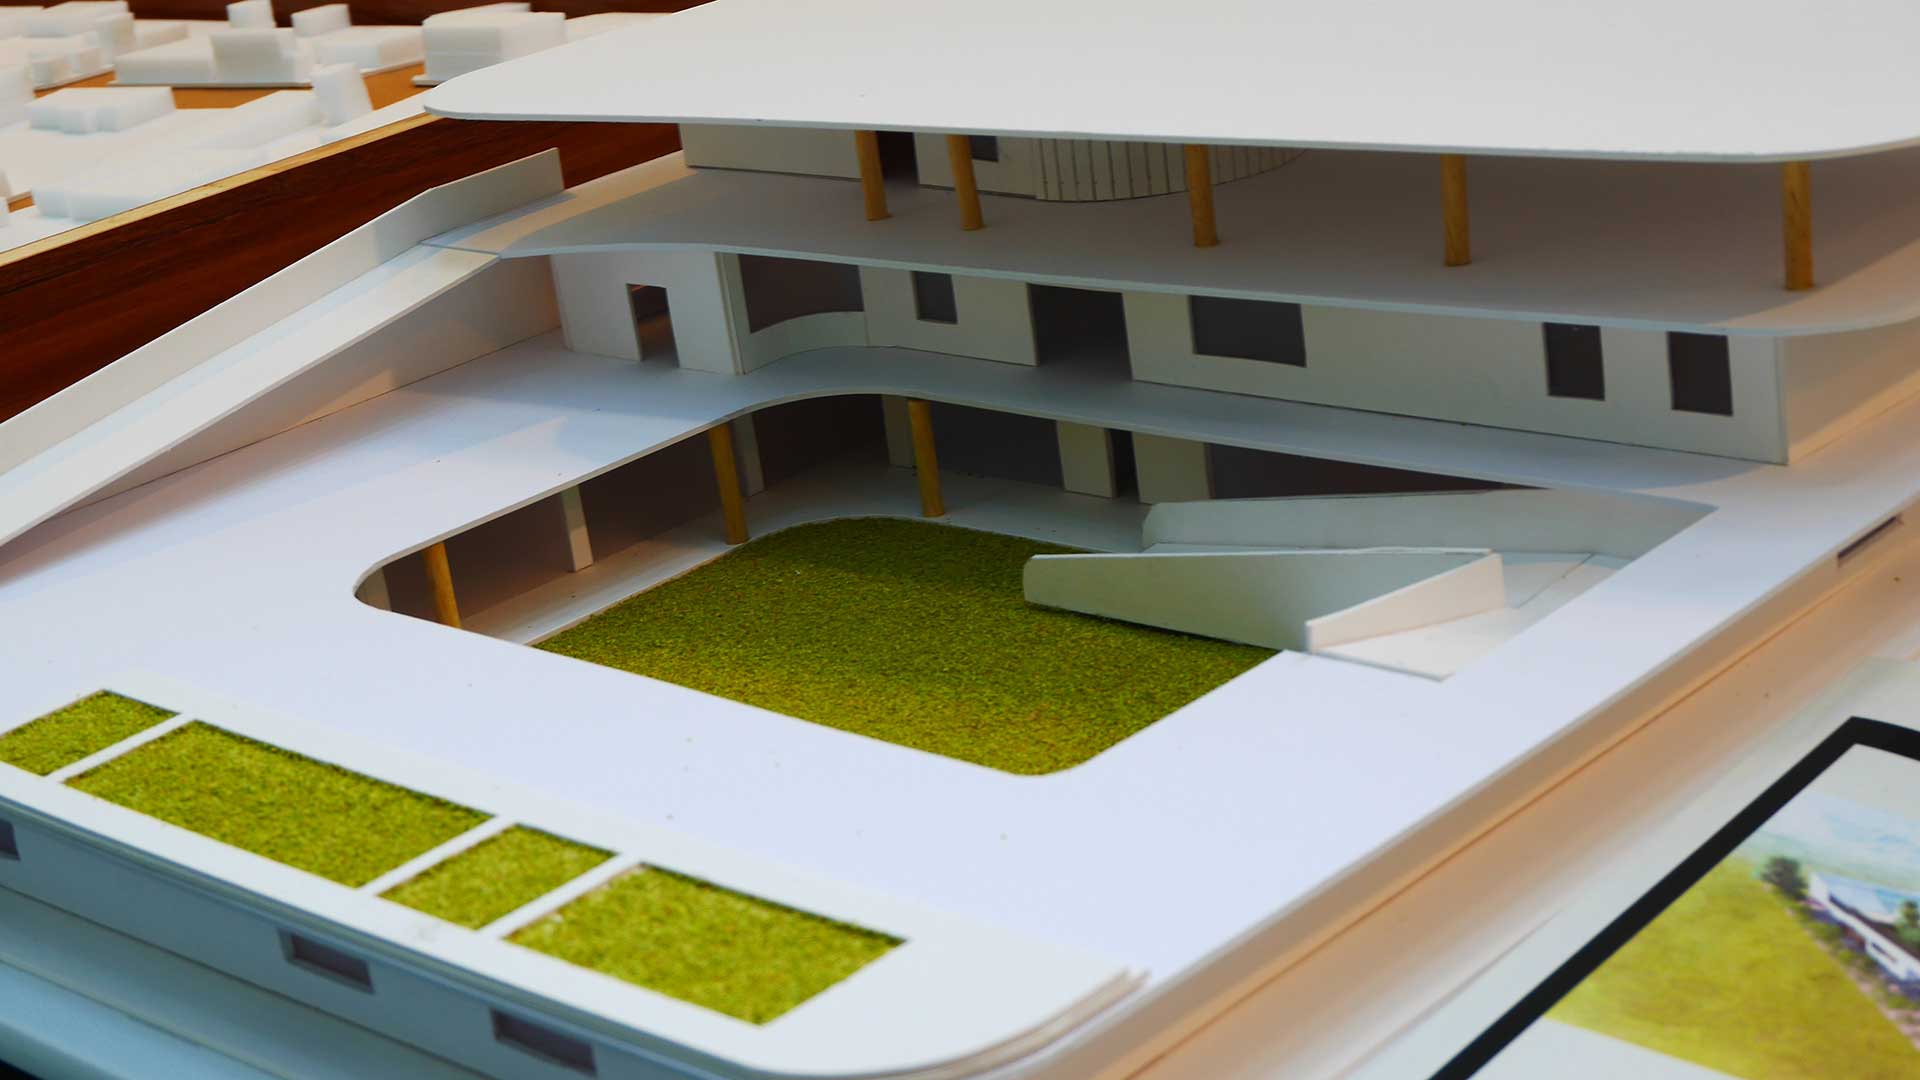 Close-up of architectural models